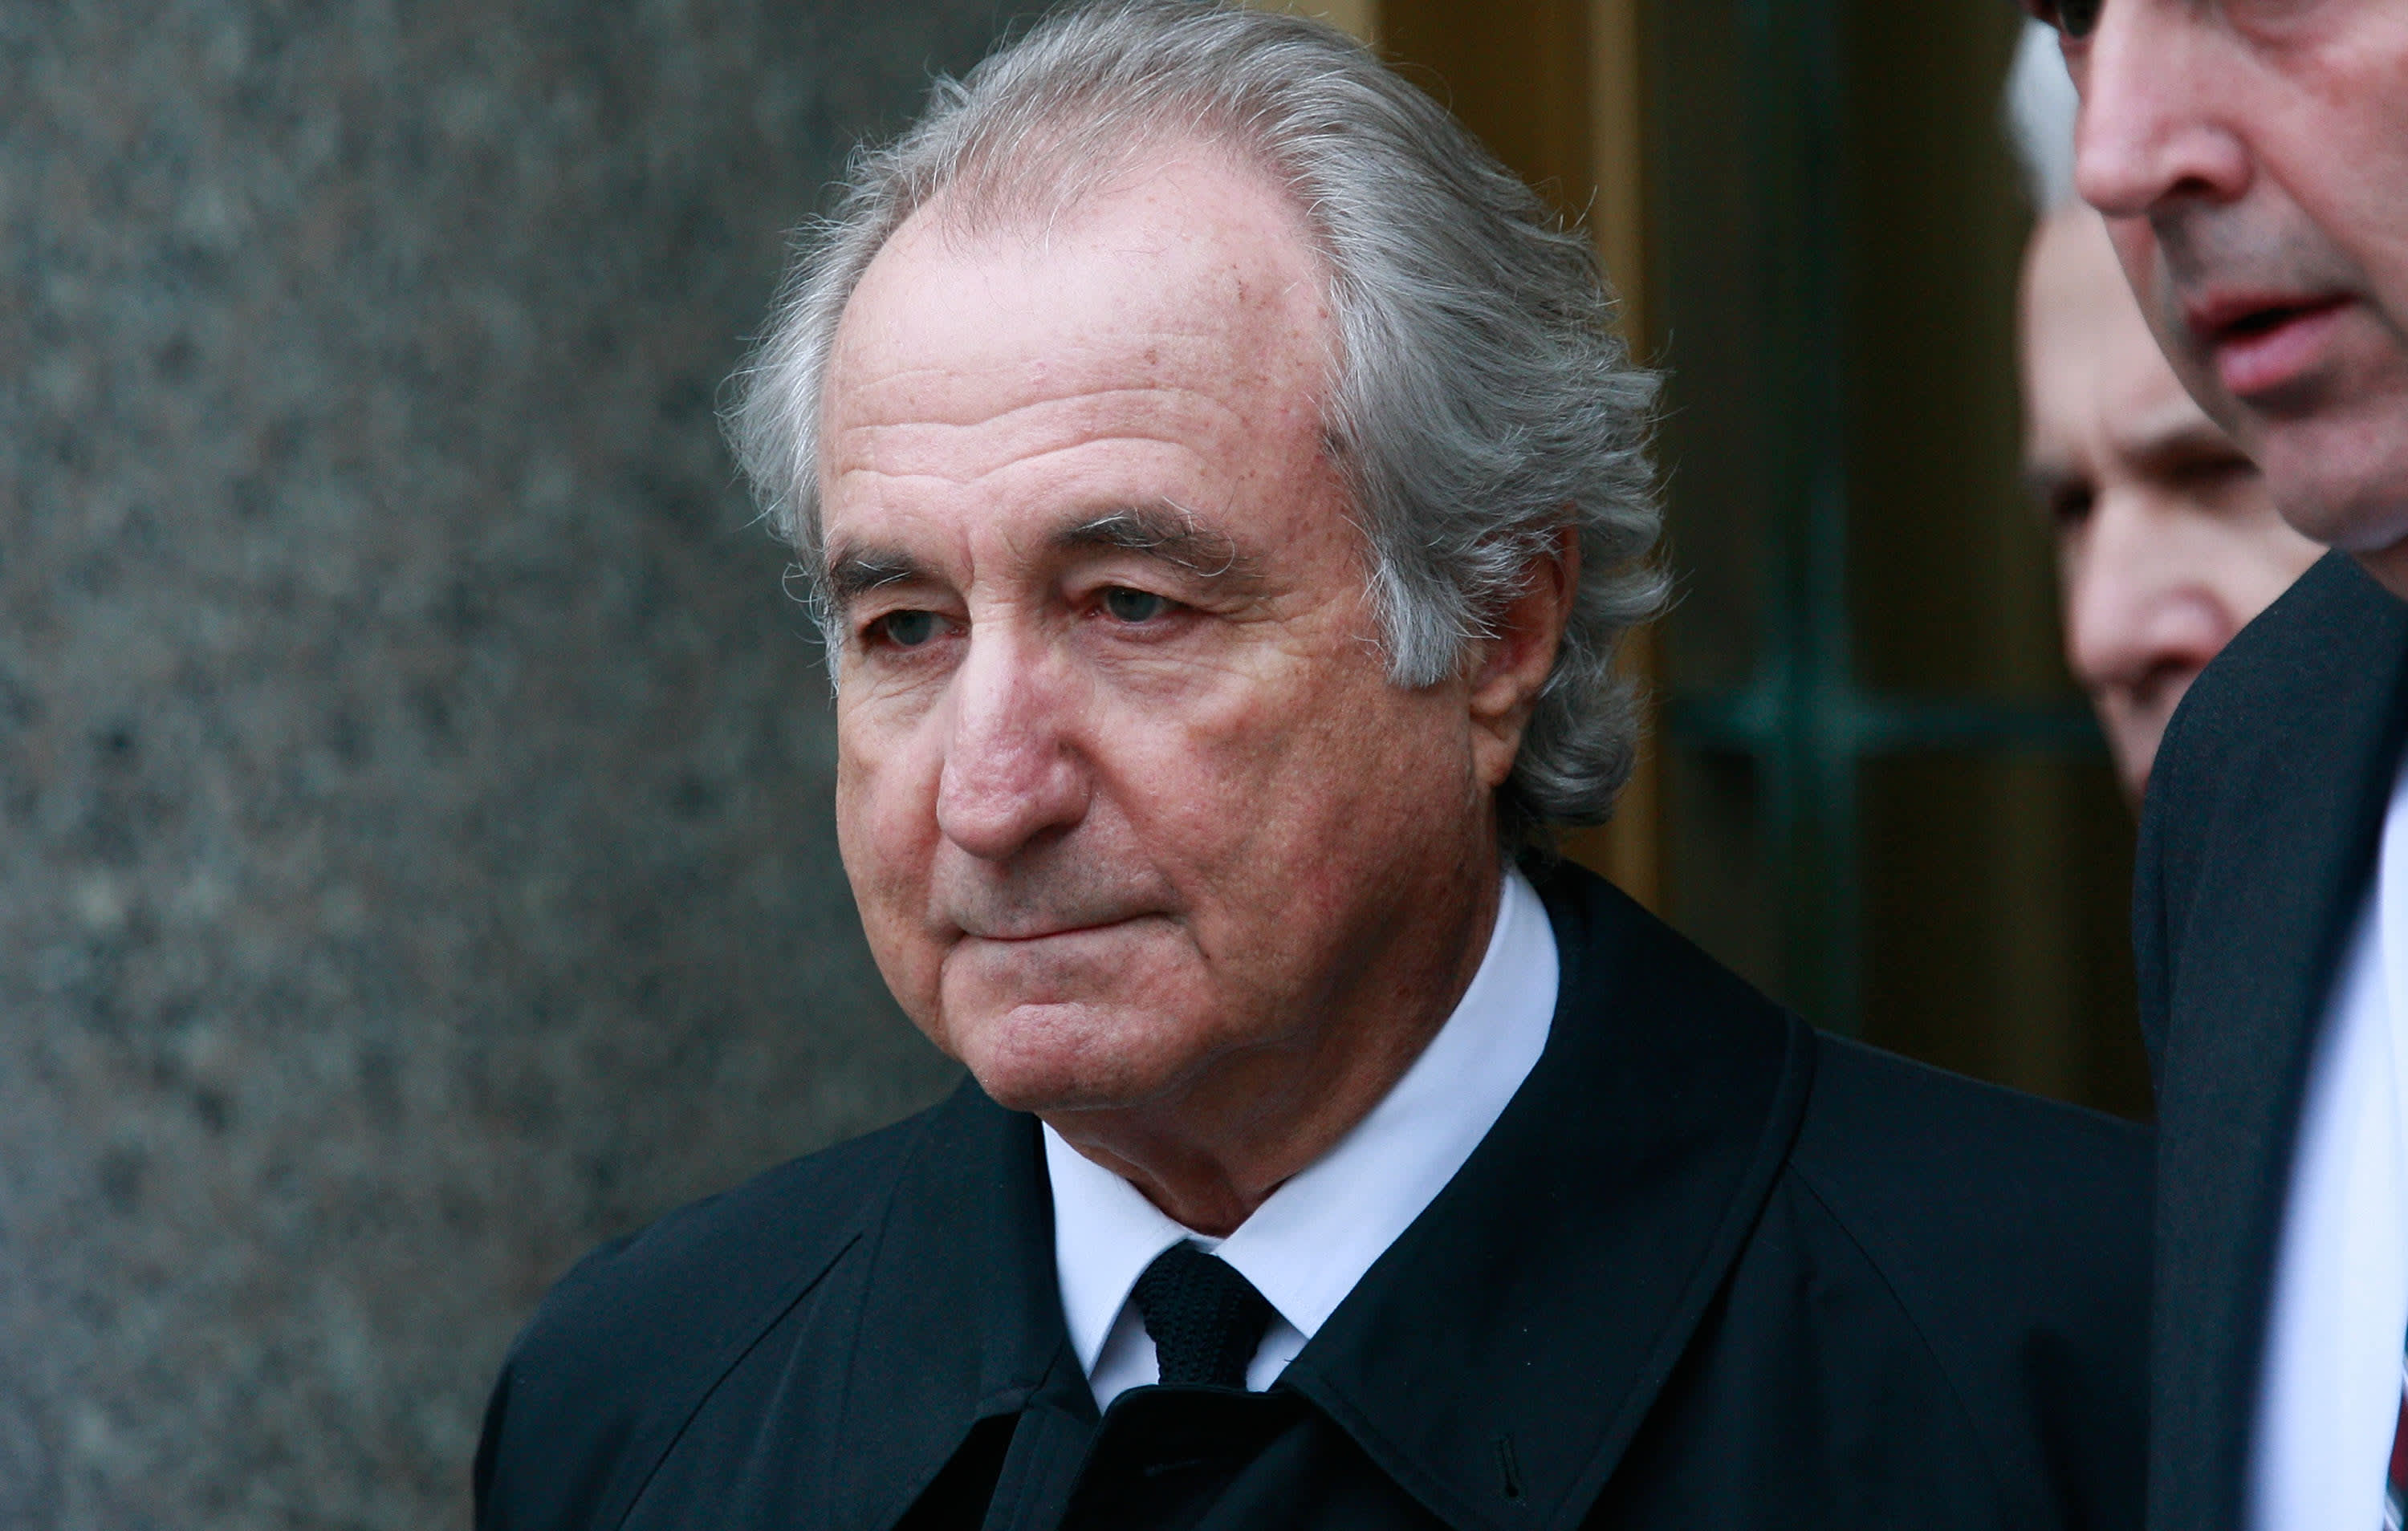 Here's how investors can spot the next Bernie Madoff